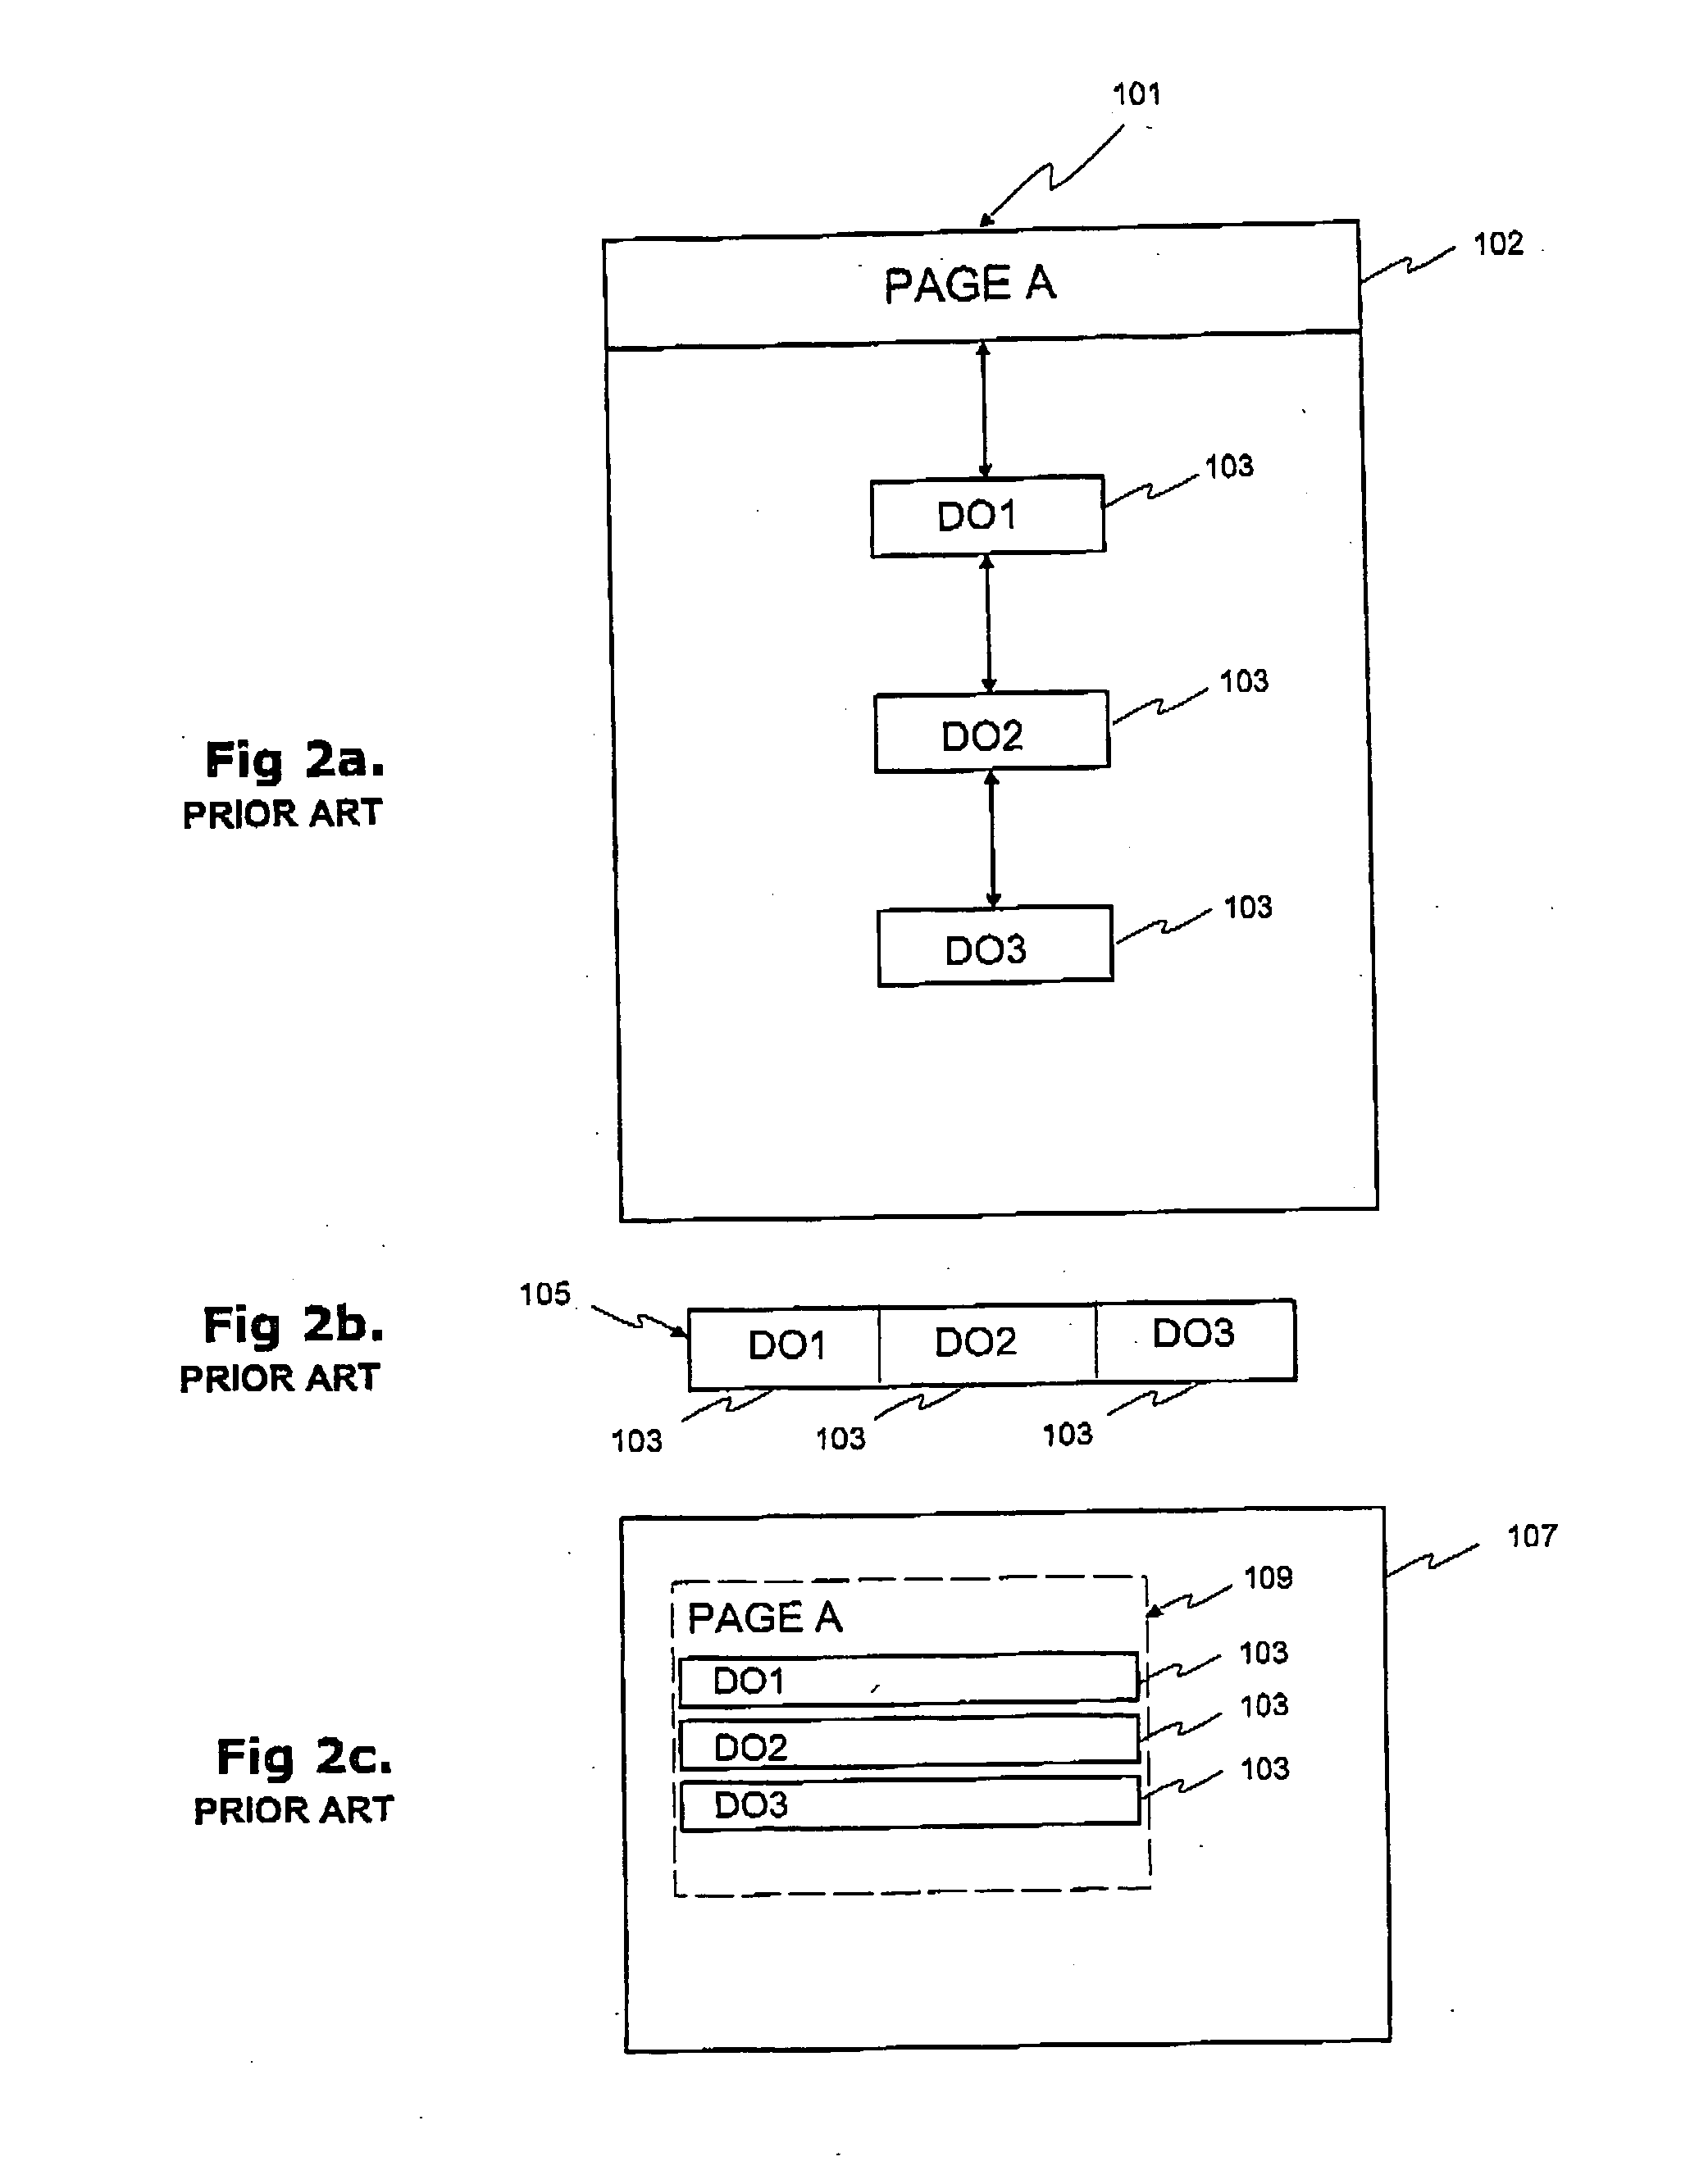 Method for checkpointing a main-memory database